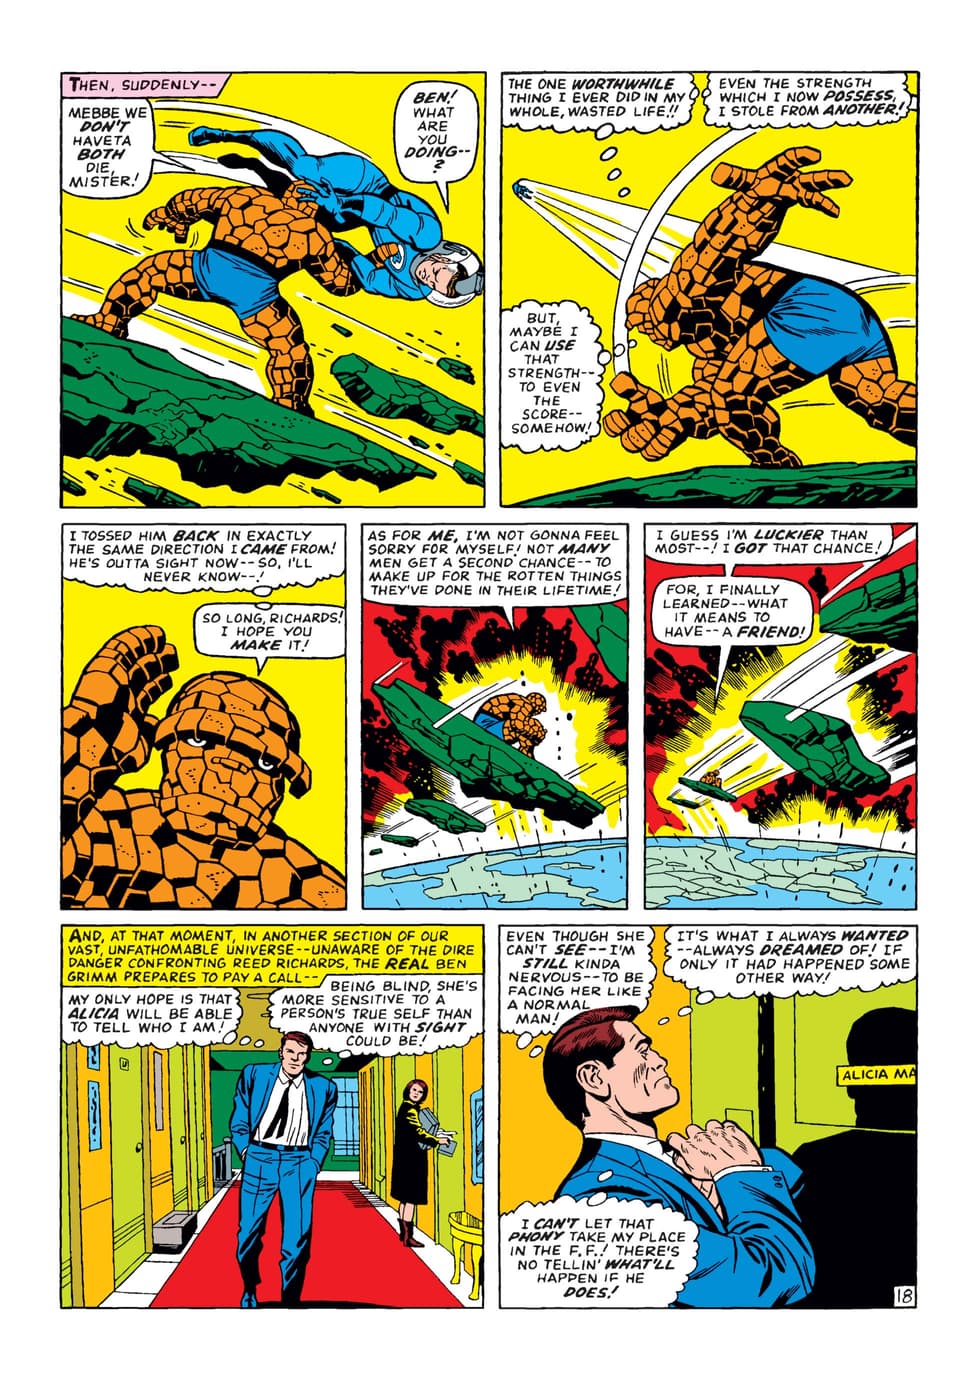 “For I finally learned -- what it means to have -- a friend!” – FANTASTIC FOUR (1961) #51